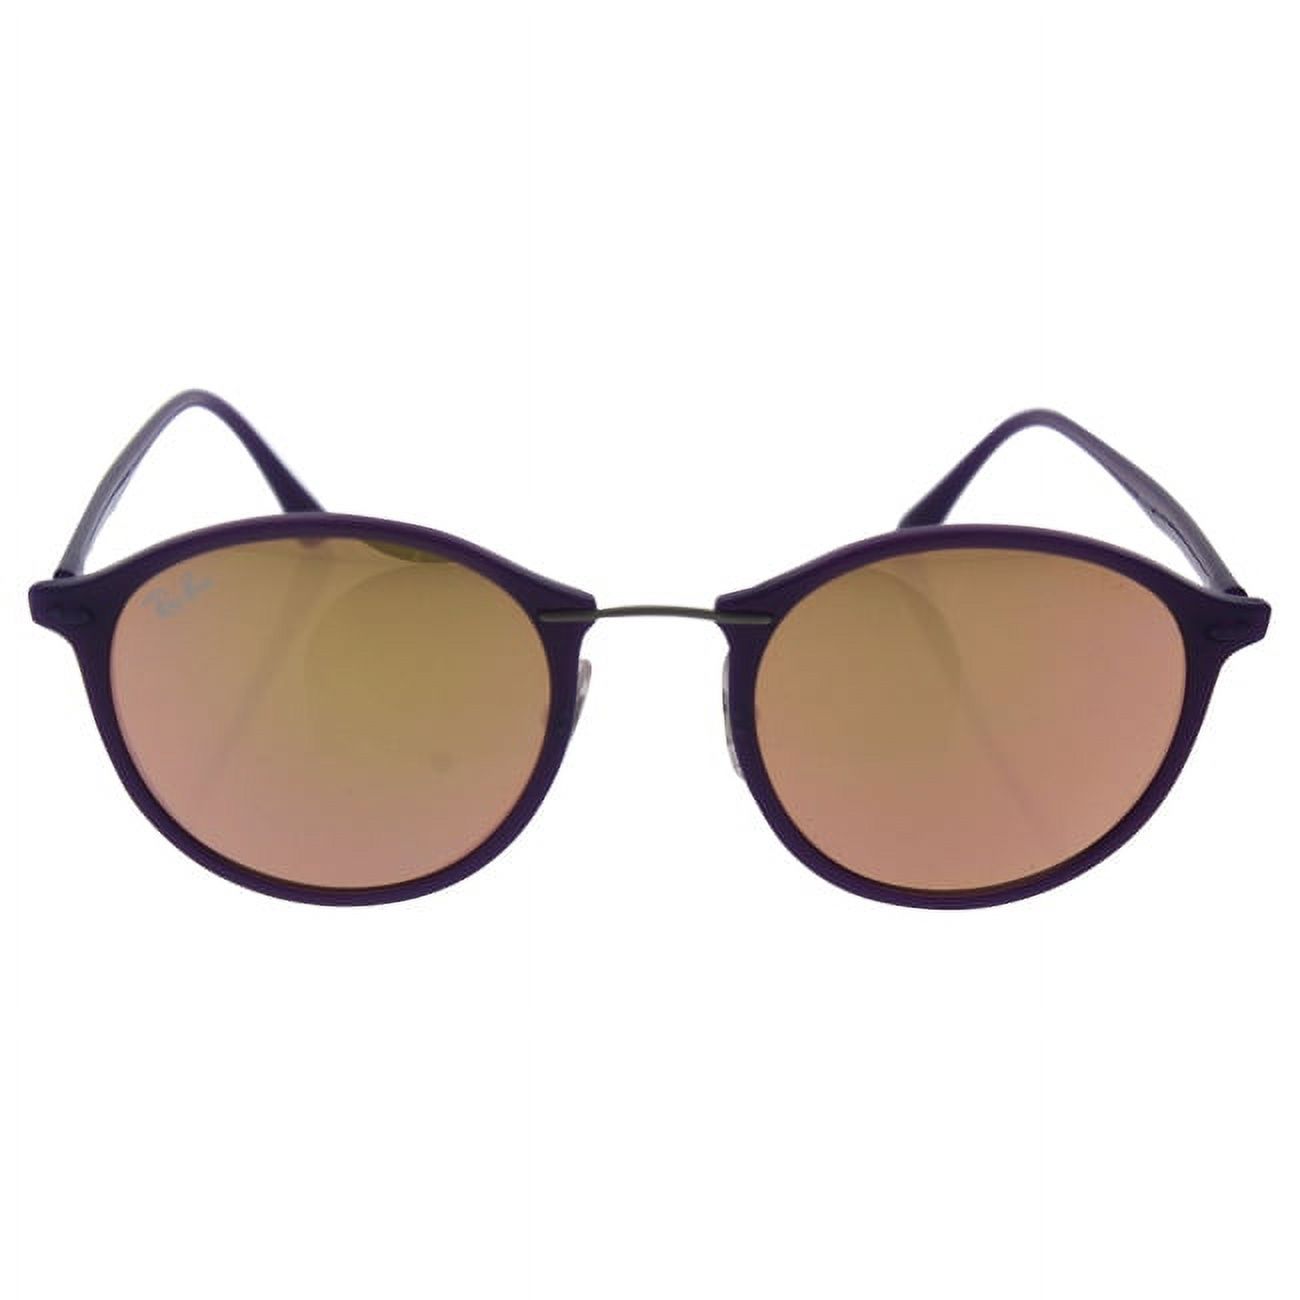 Ray Ban RB 4242 6034-2Y LightRay - Violet-Copper 49-21-140 mm 49-21-140 mm - image 1 of 2